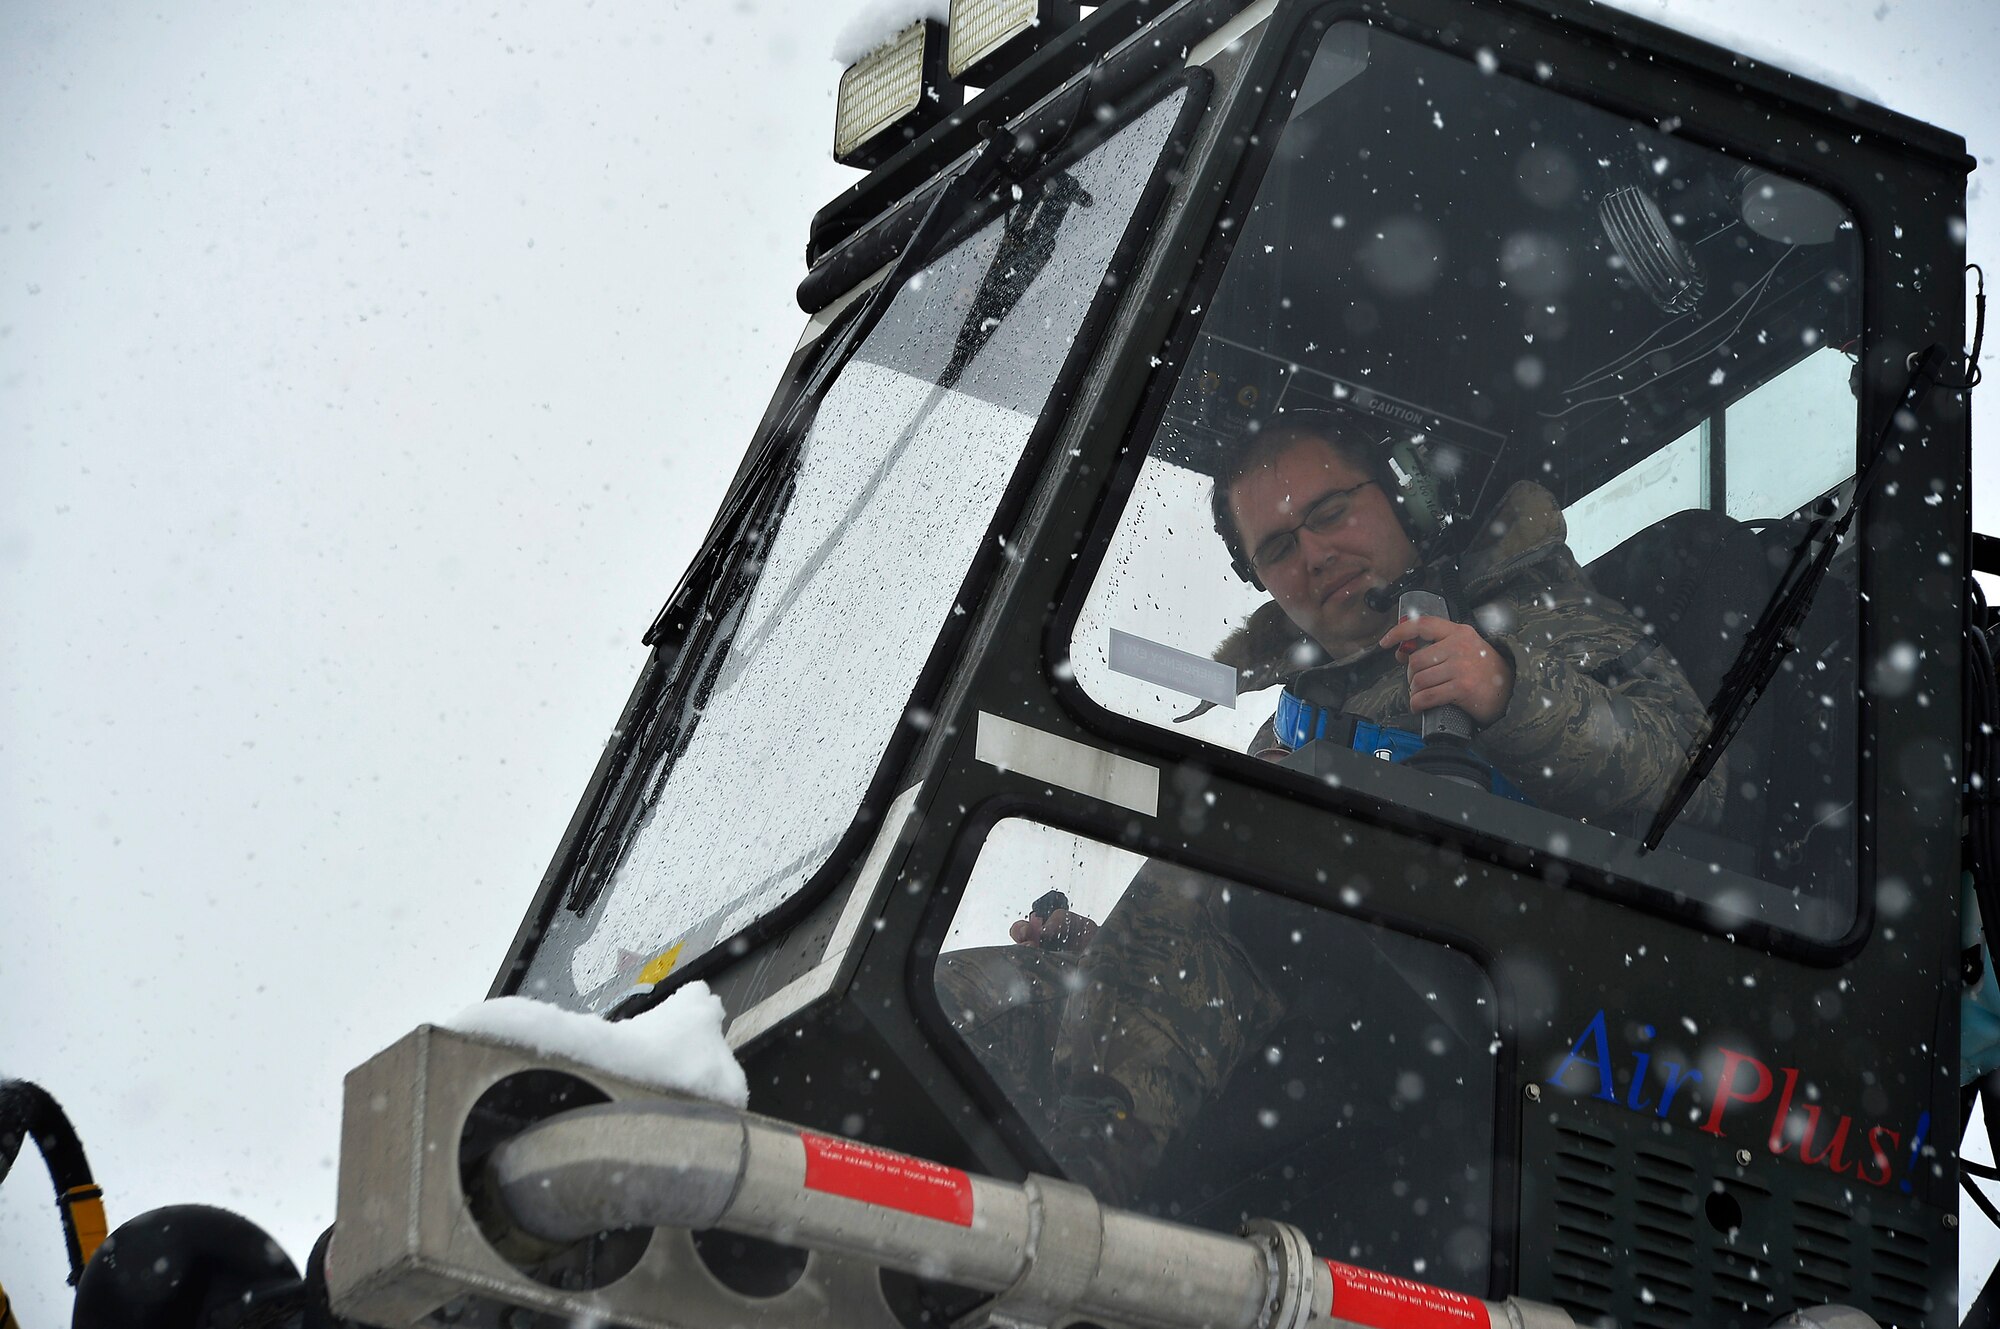 Staff Sgt. Brian Leddon, 86th Aircraft Maintenance Squadron missions systems craftsman, operates a de-icing vehicle at Ramstein Air Base, Germany, Jan. 10, 2017. More than three inches of snow fell in the area, prompting snow removal operations throughout the base. The operations included plowing snow, de-icing aircraft, and applying salt on roads and walkways. (U.S. Air Force photo by Airman 1st Class Joshua Magbanua)